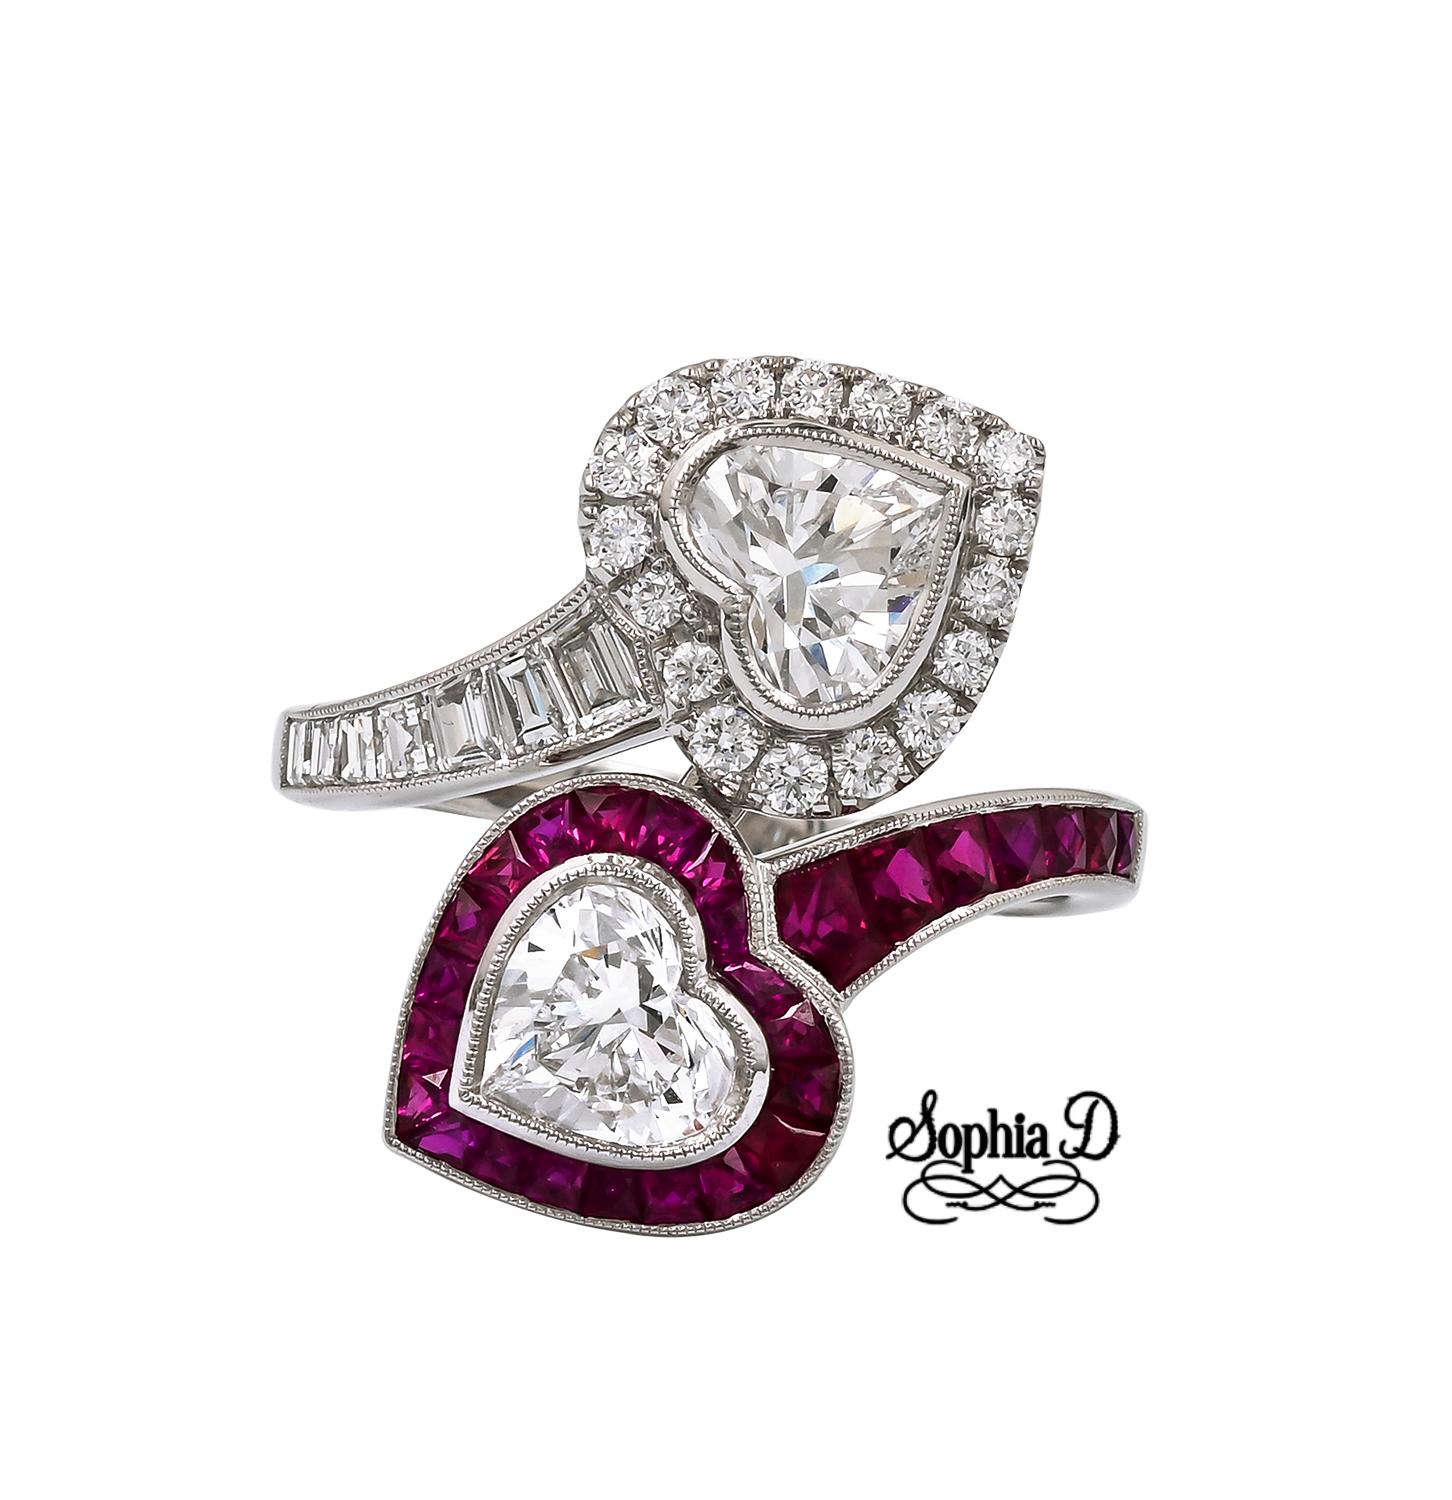 A timeless symbol of love and connection, this heart shaped Toi et Moi ring set in platinum features 2 heart shaped cut diamonds that weigh .81 ct and .78 ct surrounded with .19 ct diamonds and .85 ct rubies.

Sophia D by Joseph Dardashti LTD has